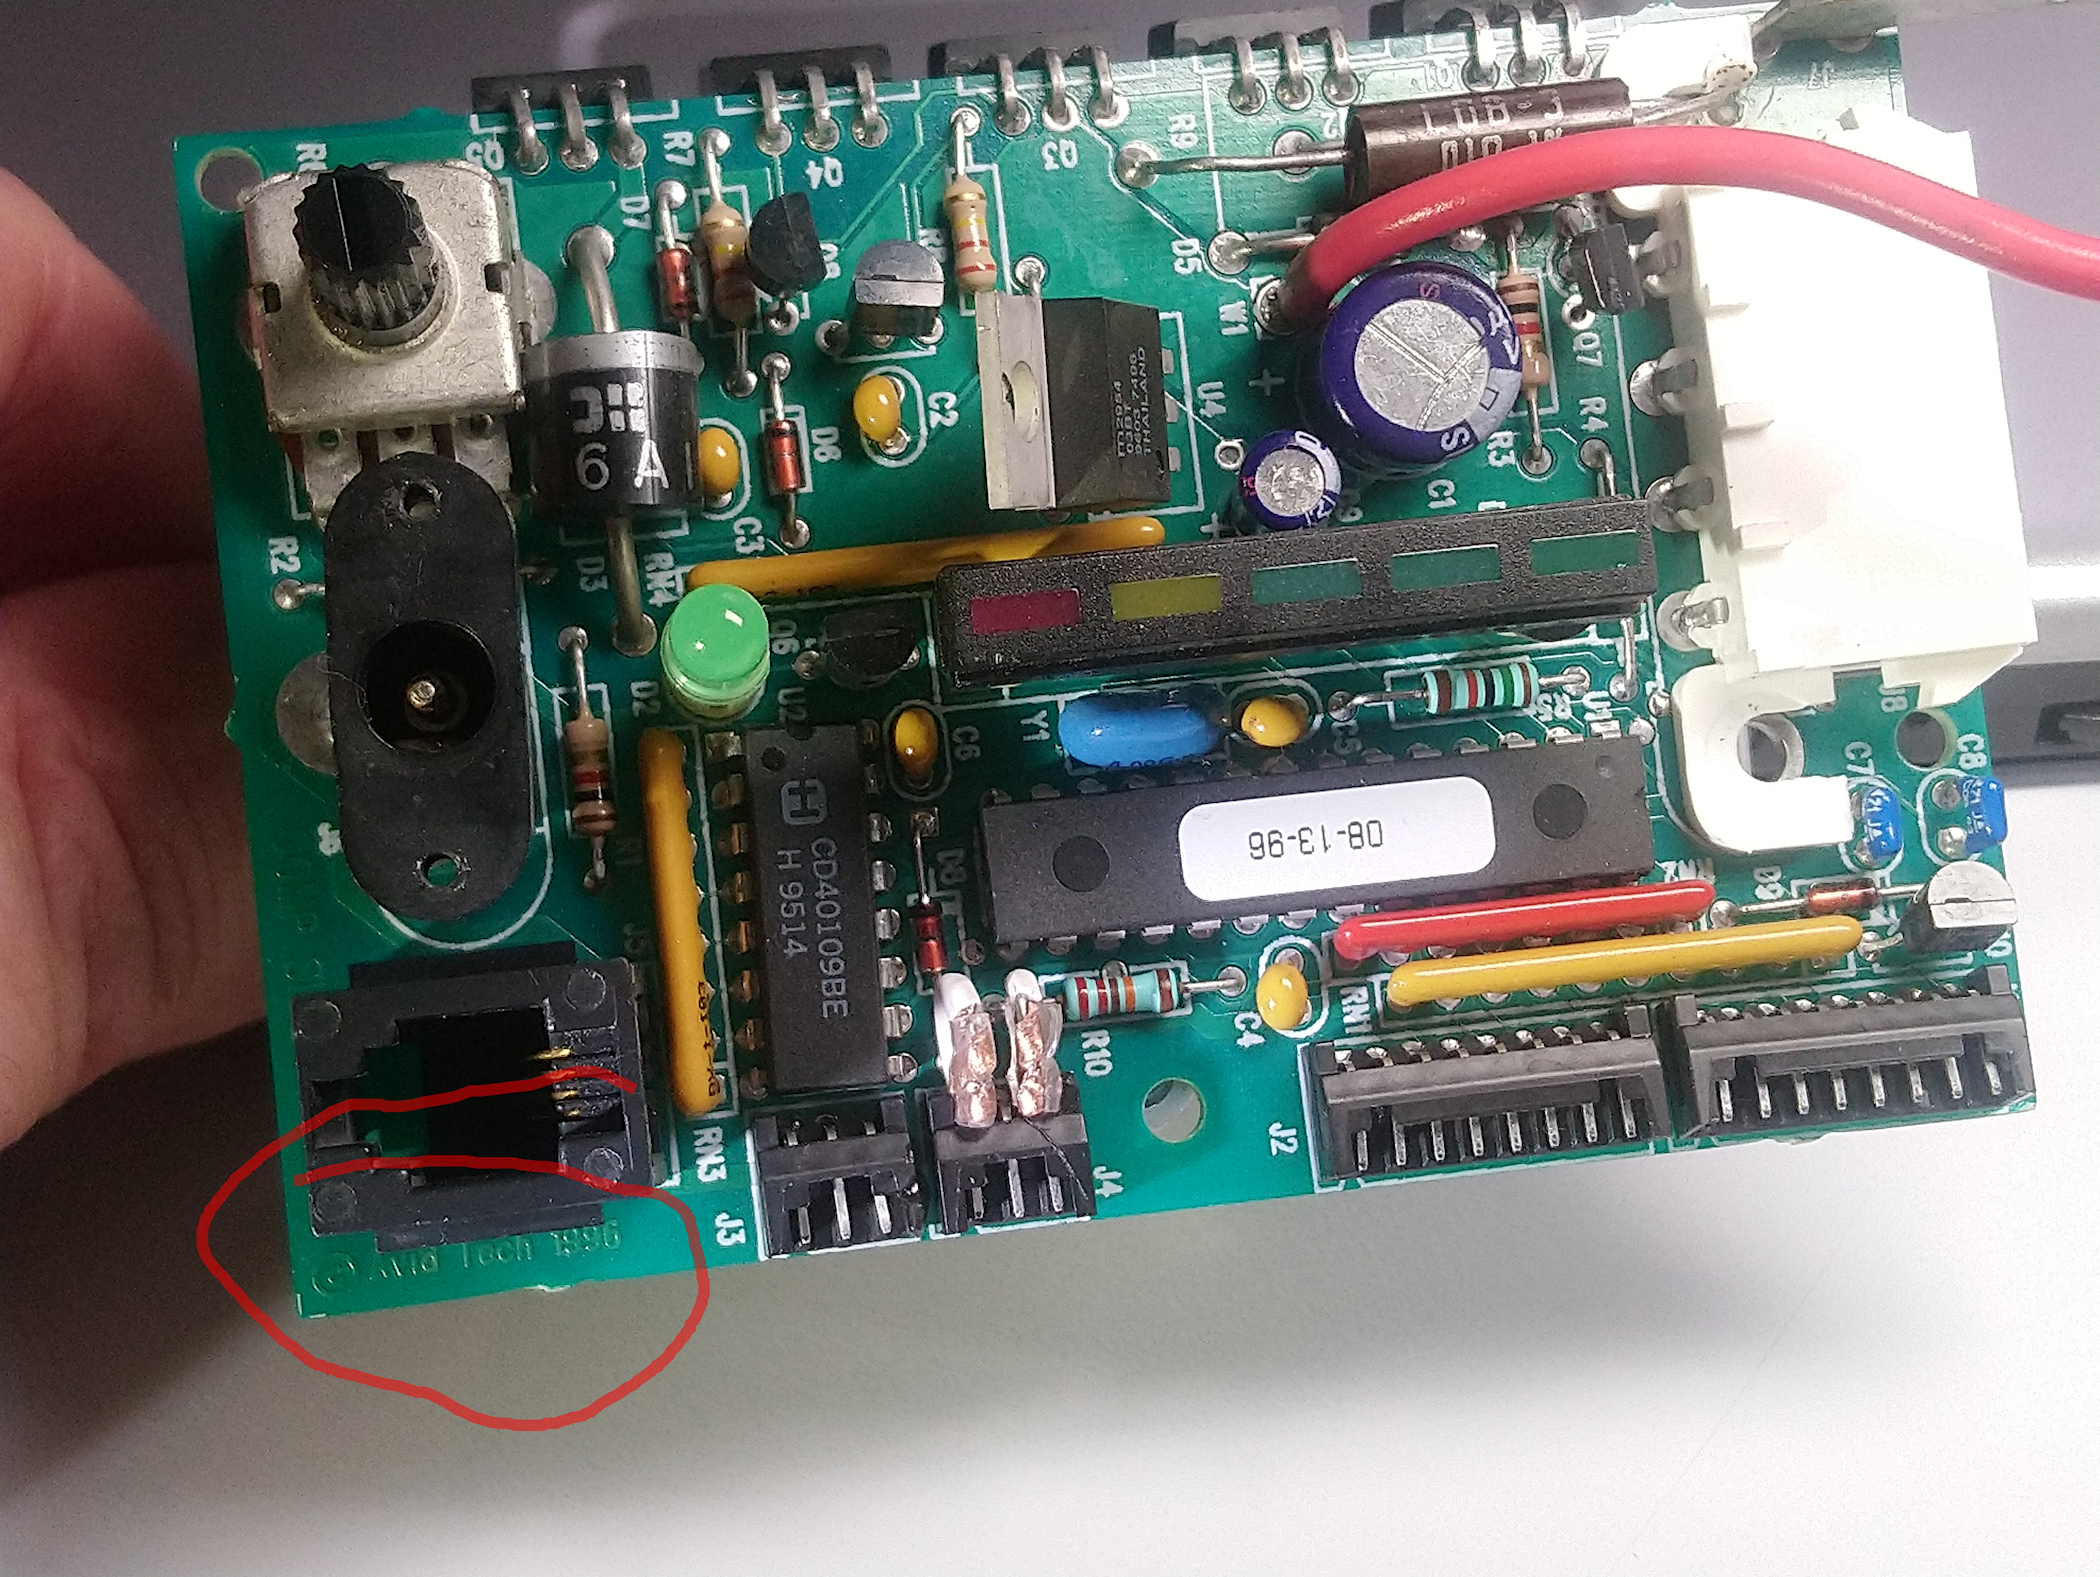 Photo showing PCB component side with red circle around manufacturer AVID which is now AVNET.